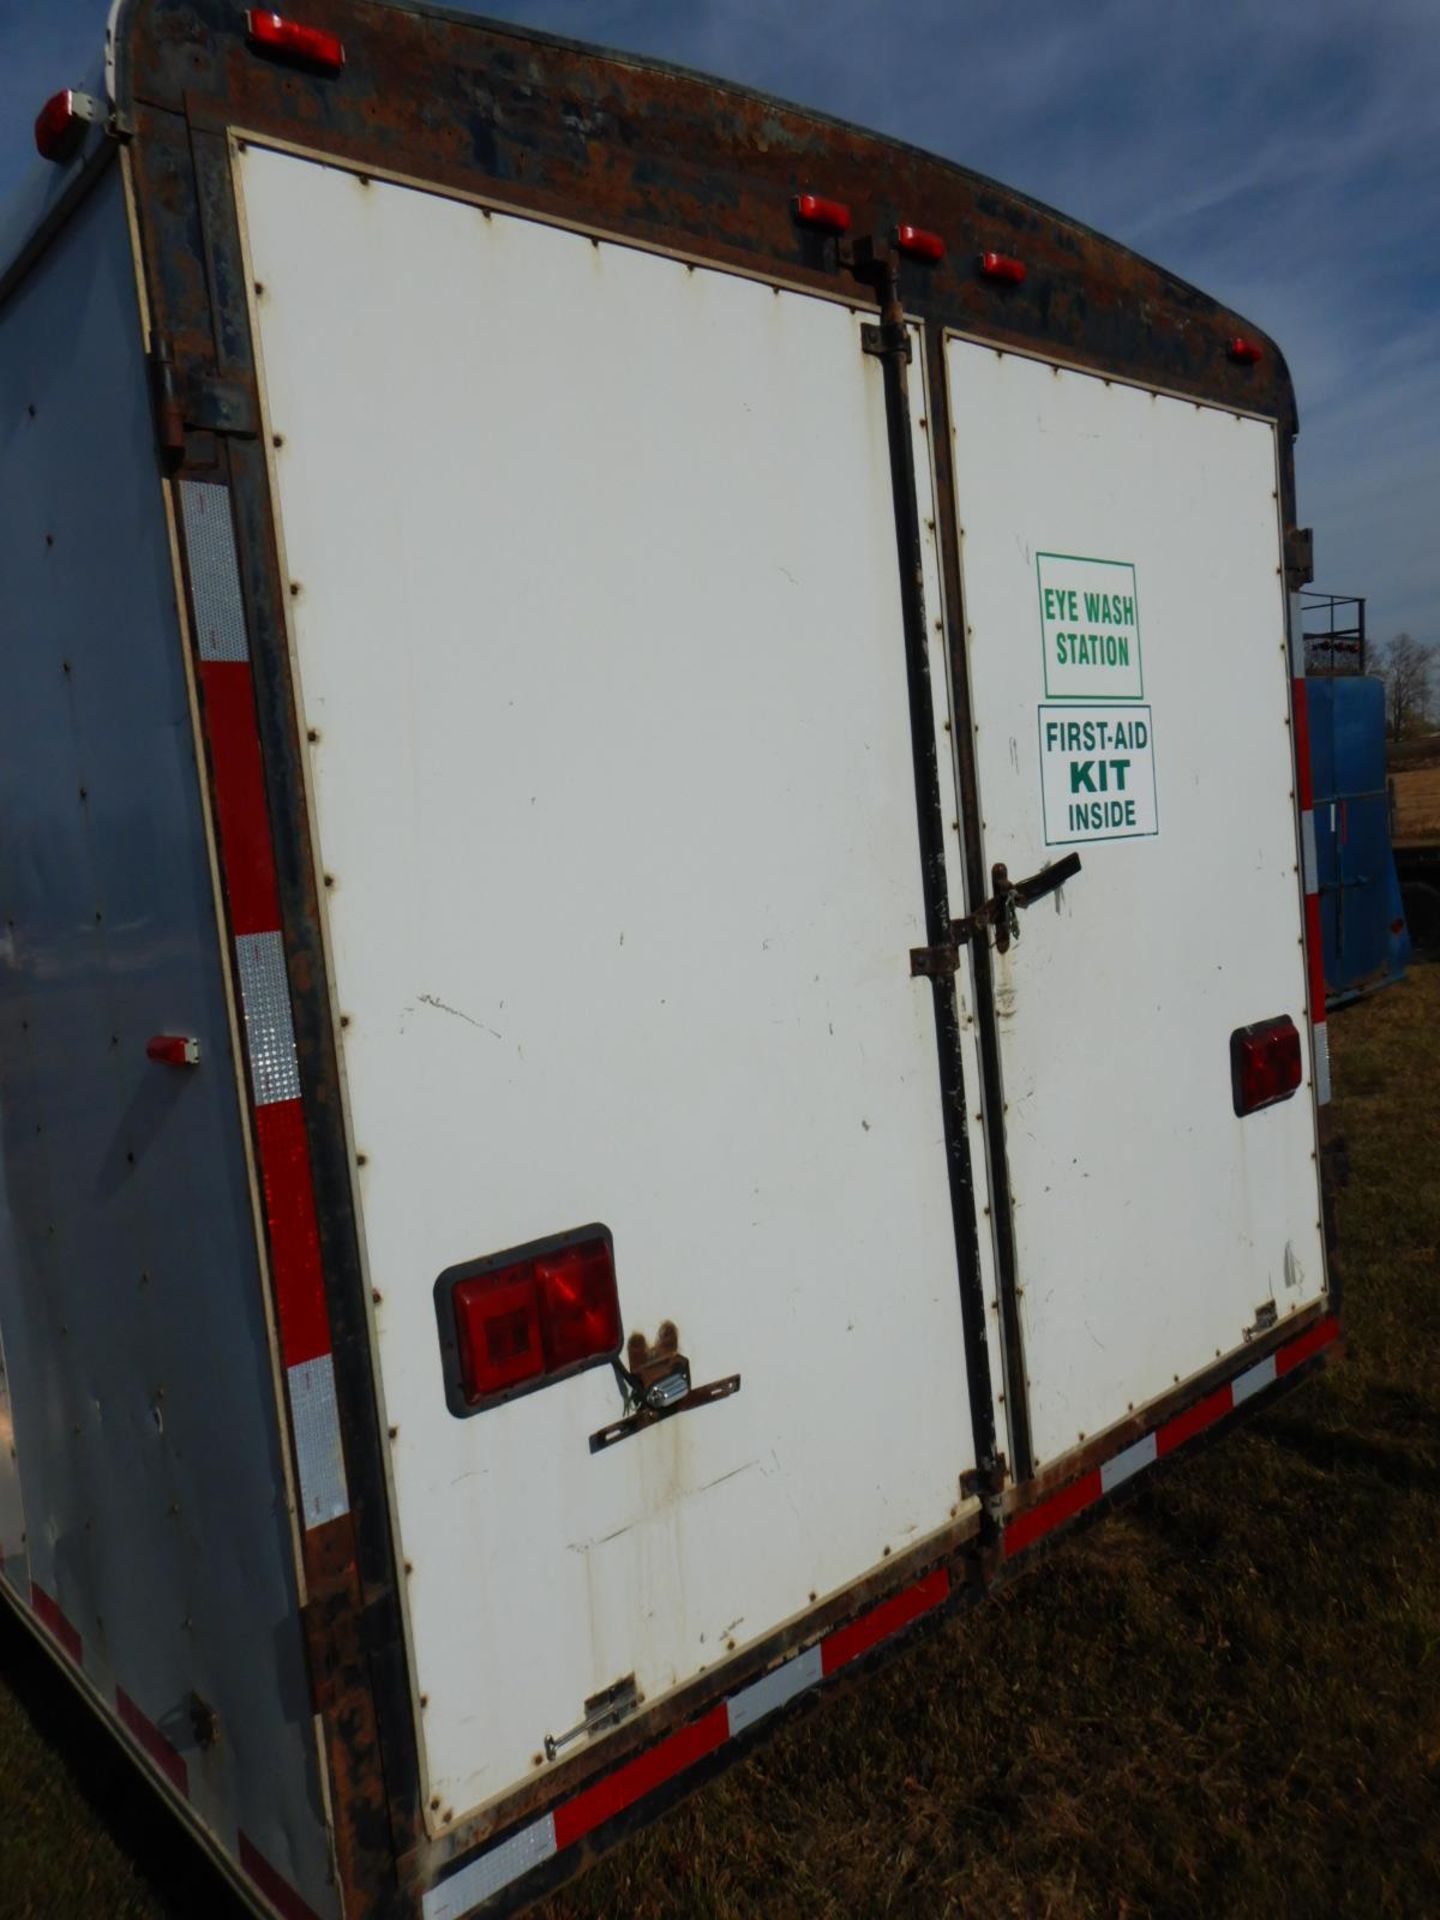 2004 20FTX8FT ENCLOSED TRAILER, T/A, GVWR 6350KG, BARN DOORS, S/N FC200418 - Image 6 of 6